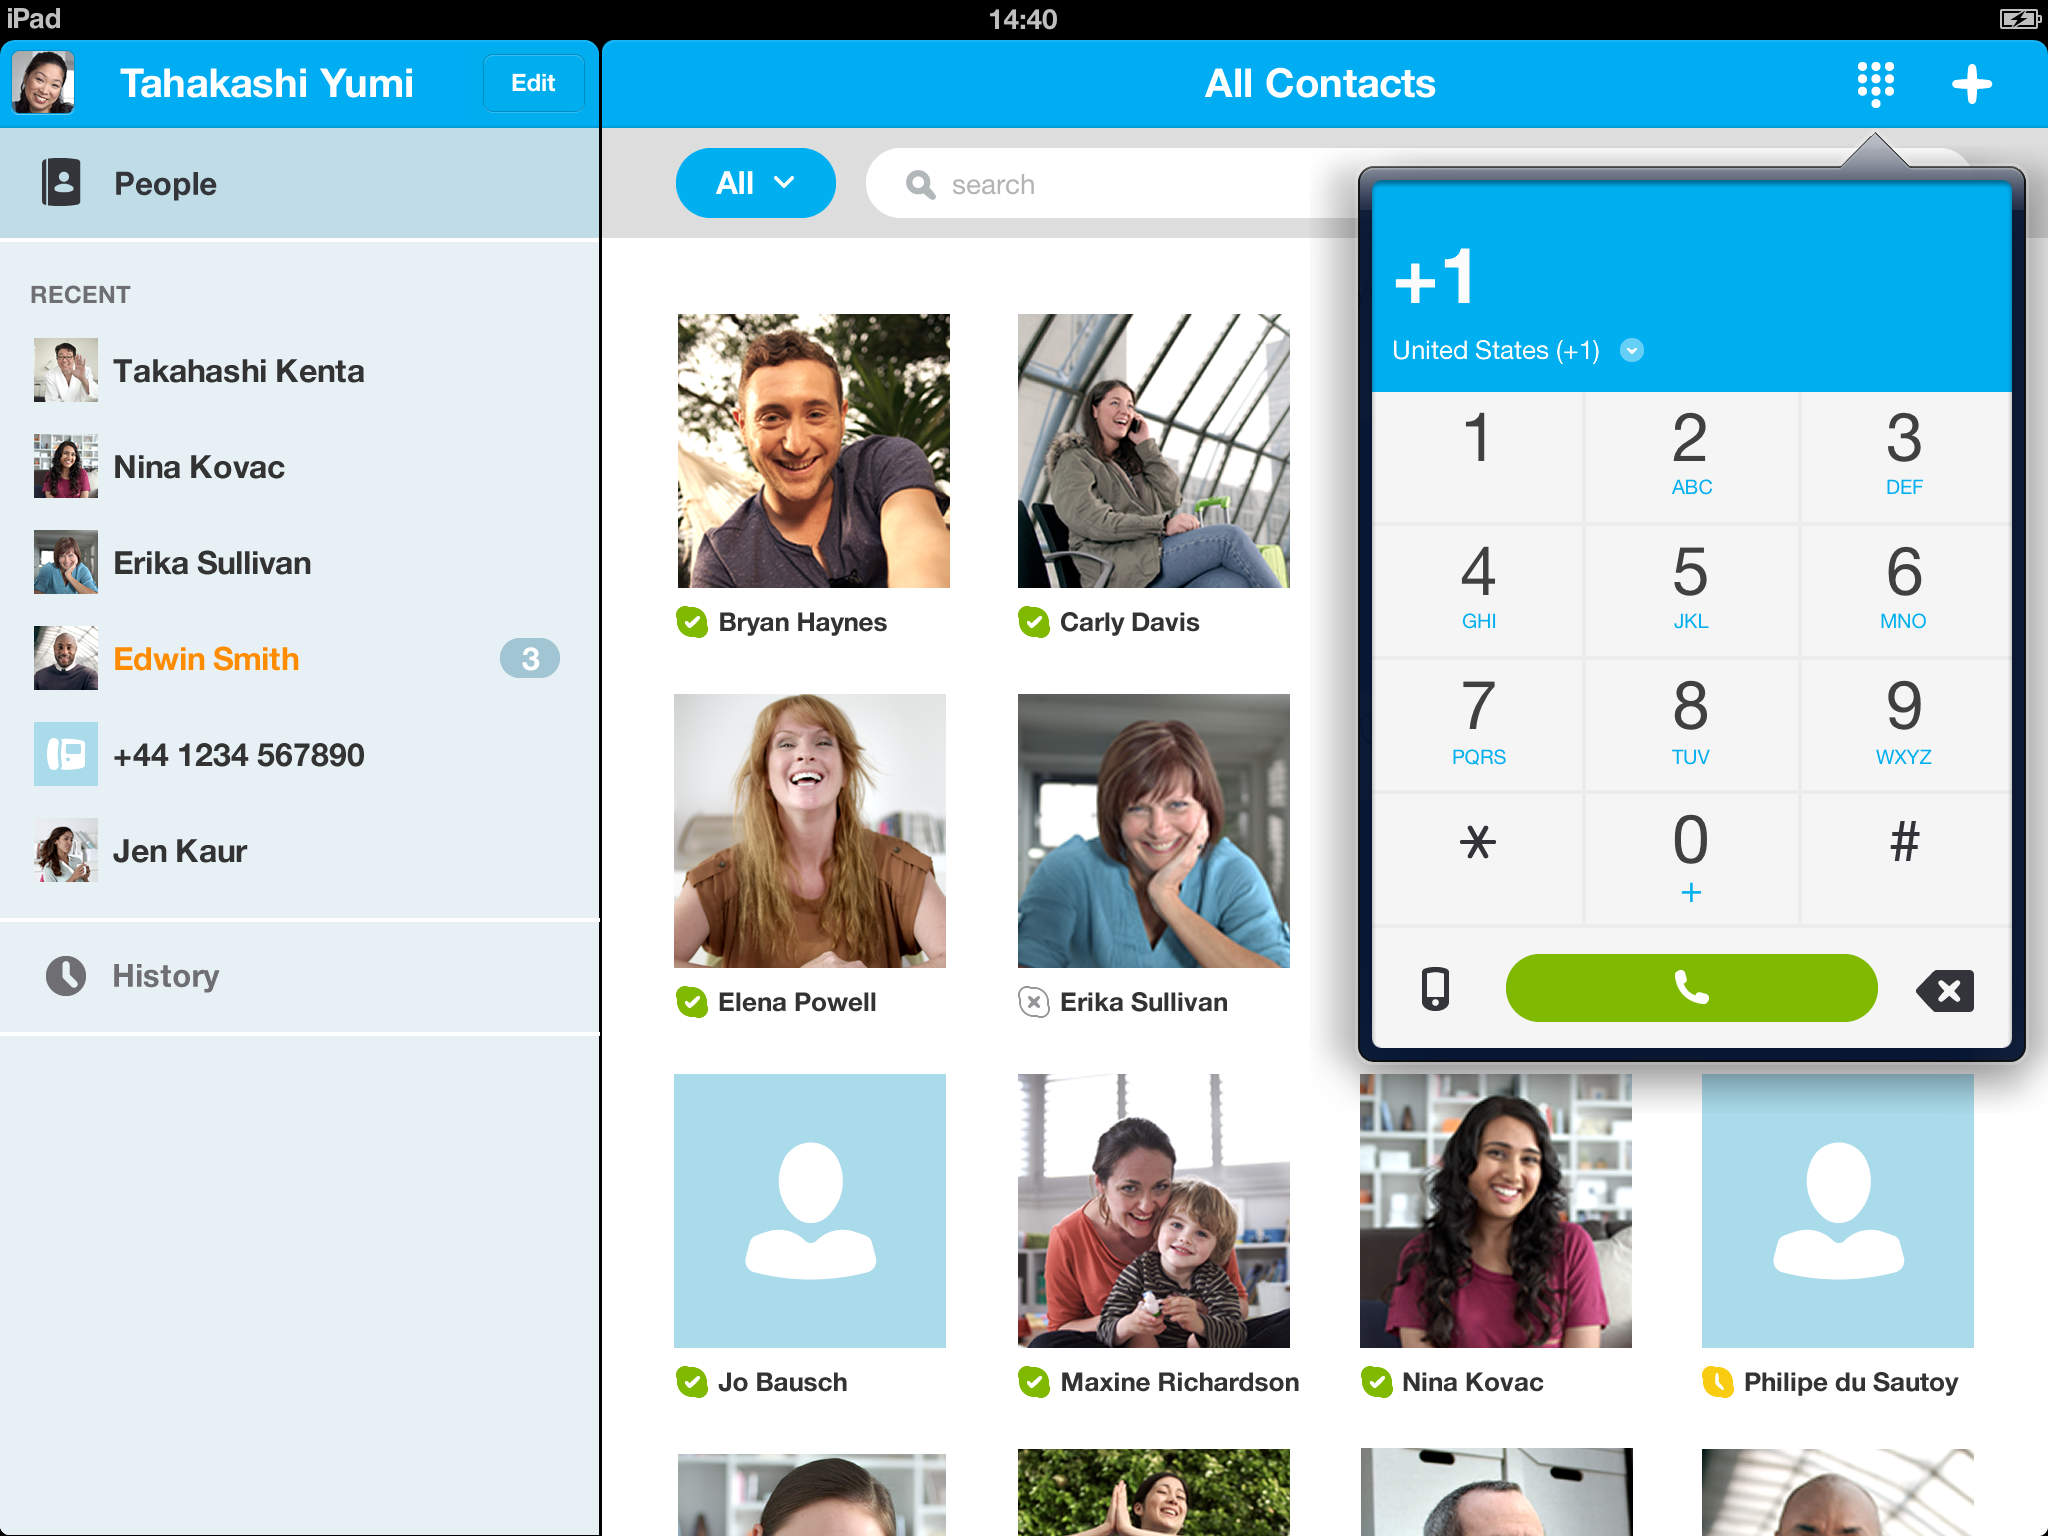 Skype for iOS Brings Ability to Join Group Voice Calls, Improved Video and Voice Call Quality, More